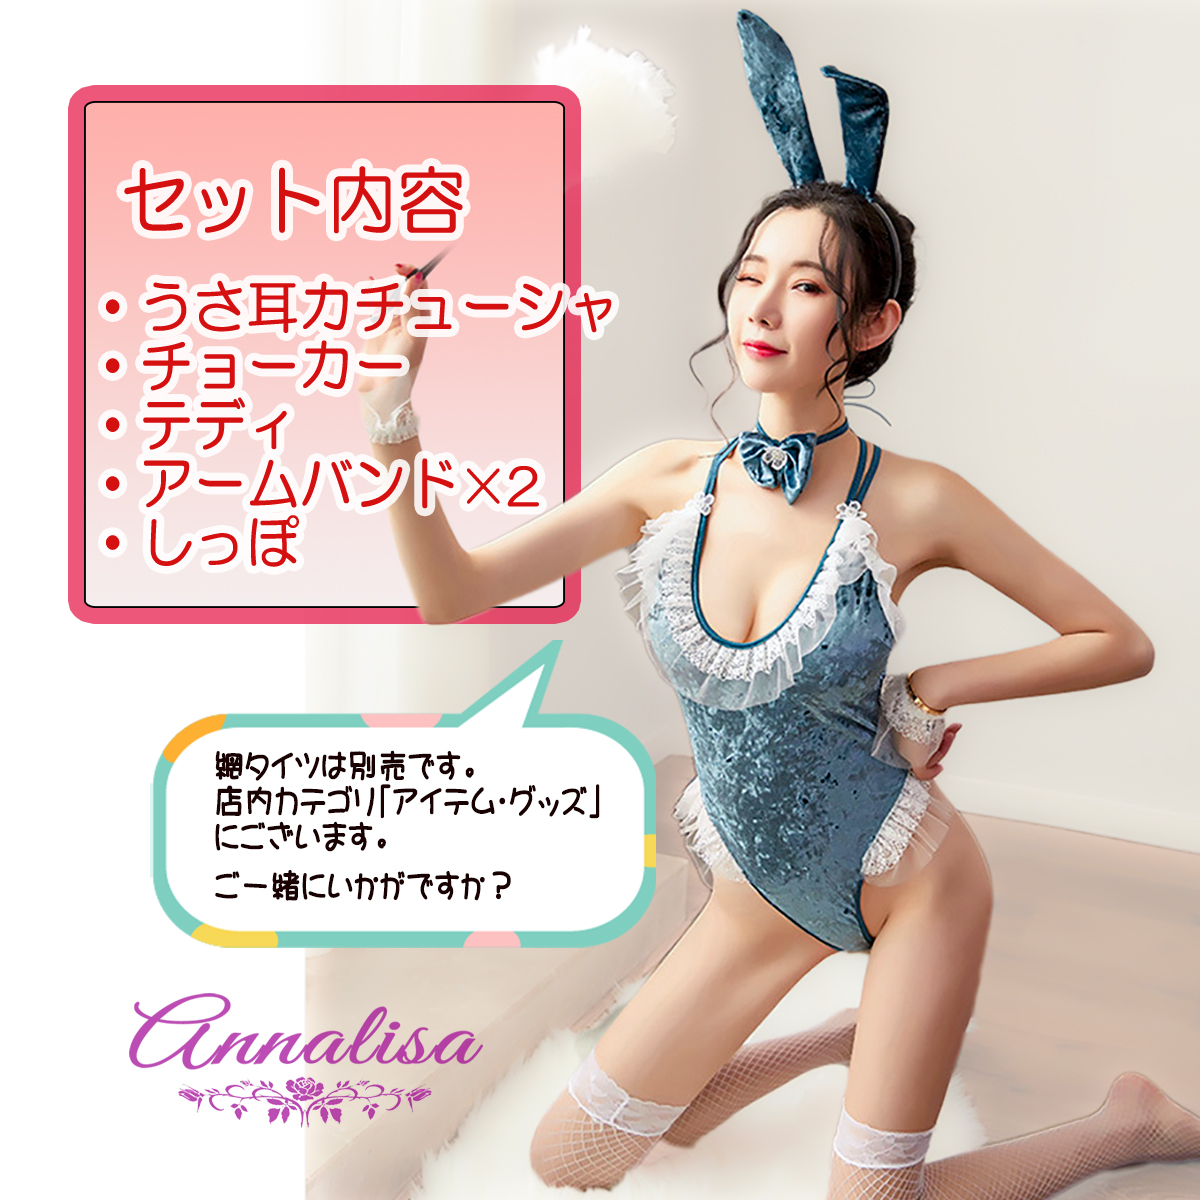  bunny girl cosplay velour ba knee large size L size sexy .. ear ... Leotard costume play clothes costume BUNNY Halloween 